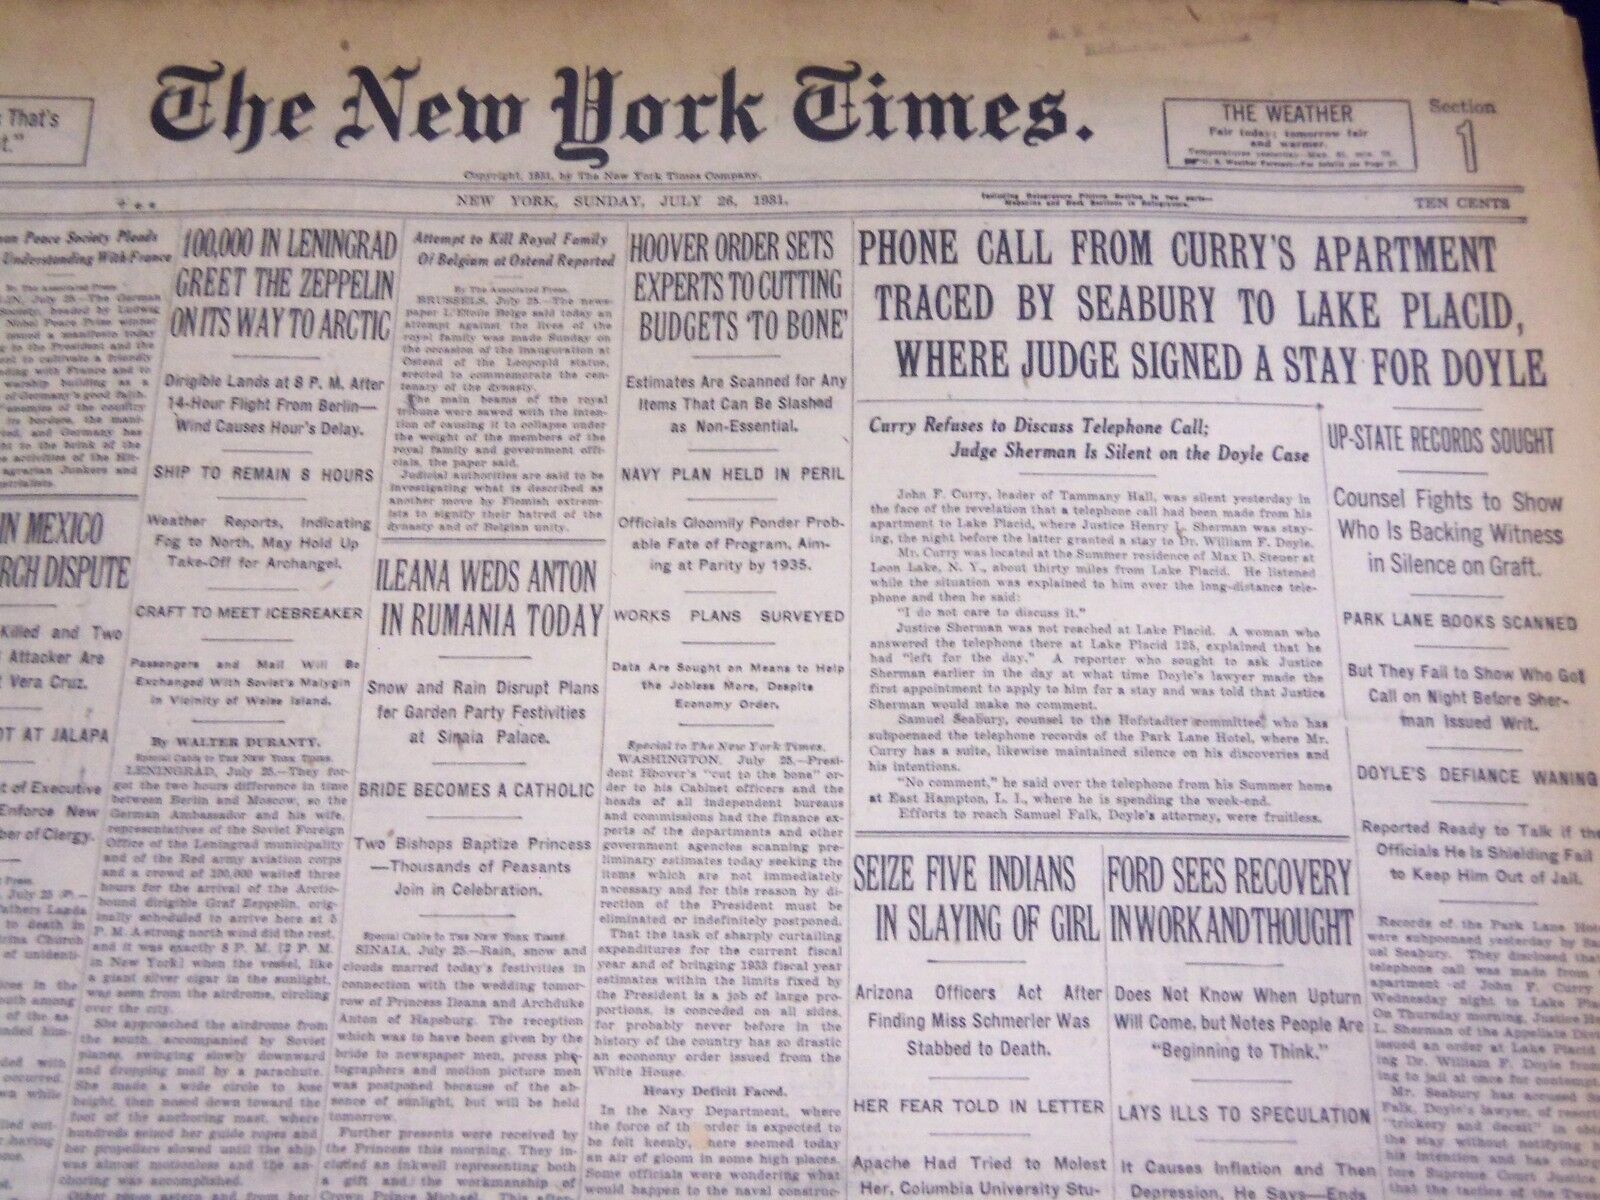 1931 JULY 26 NEW YORK TIMES CALL FROM CURRY'S APARTMENT TRACED SEABURY - NT 2205